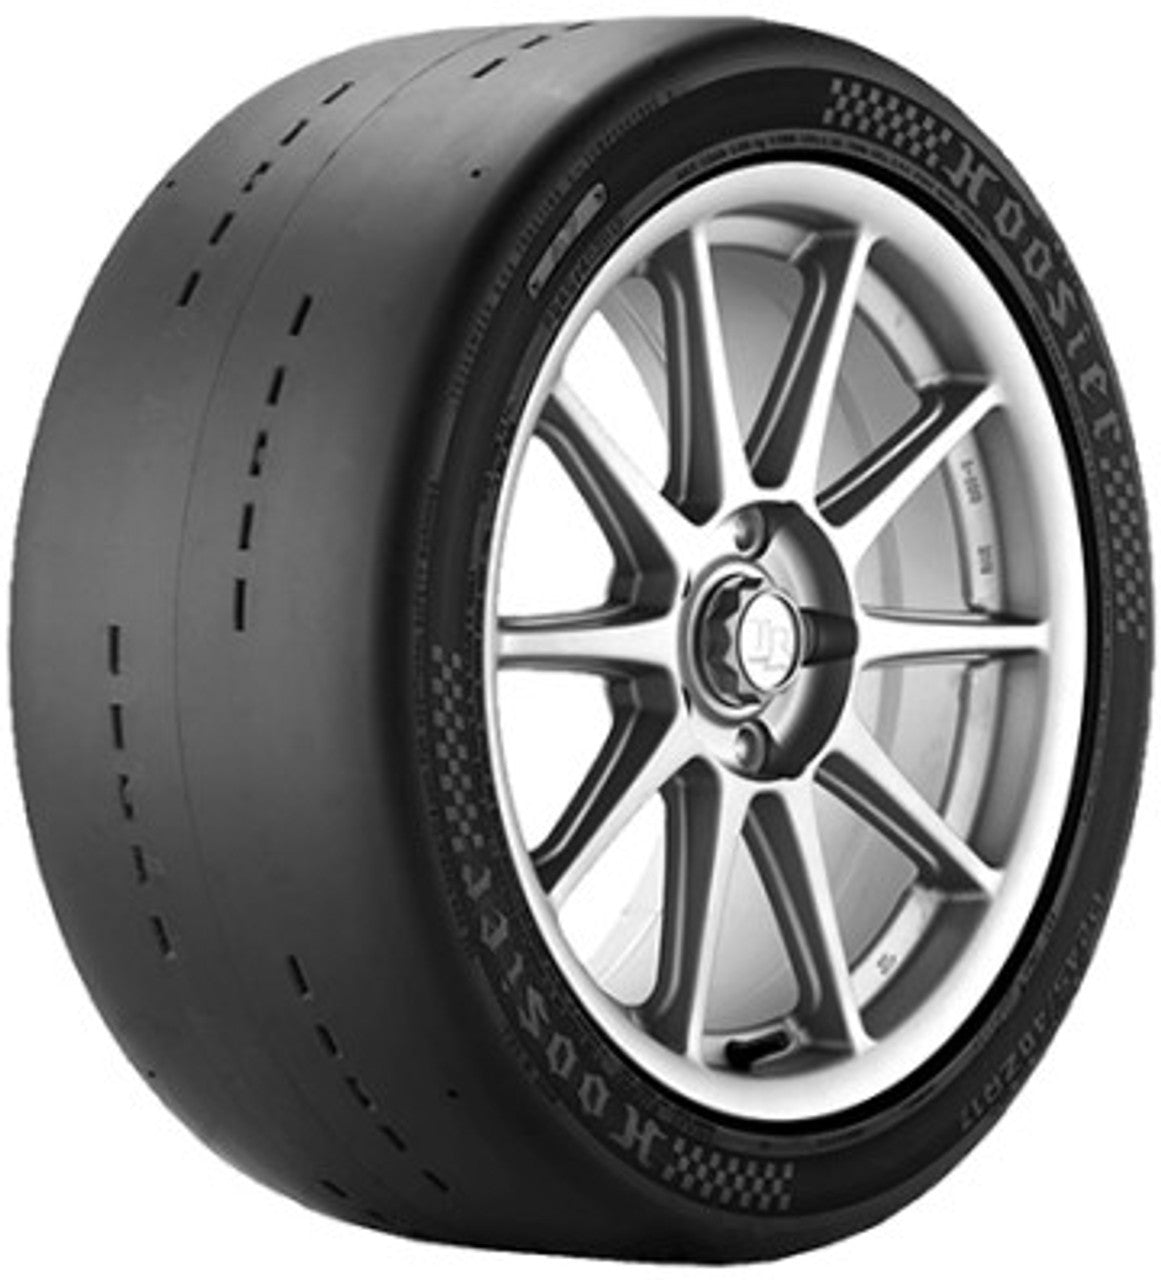 Hoosier P295/55R-15 Drag Radial Tire - DOT - DR2 Tires and Tubes Tires main image